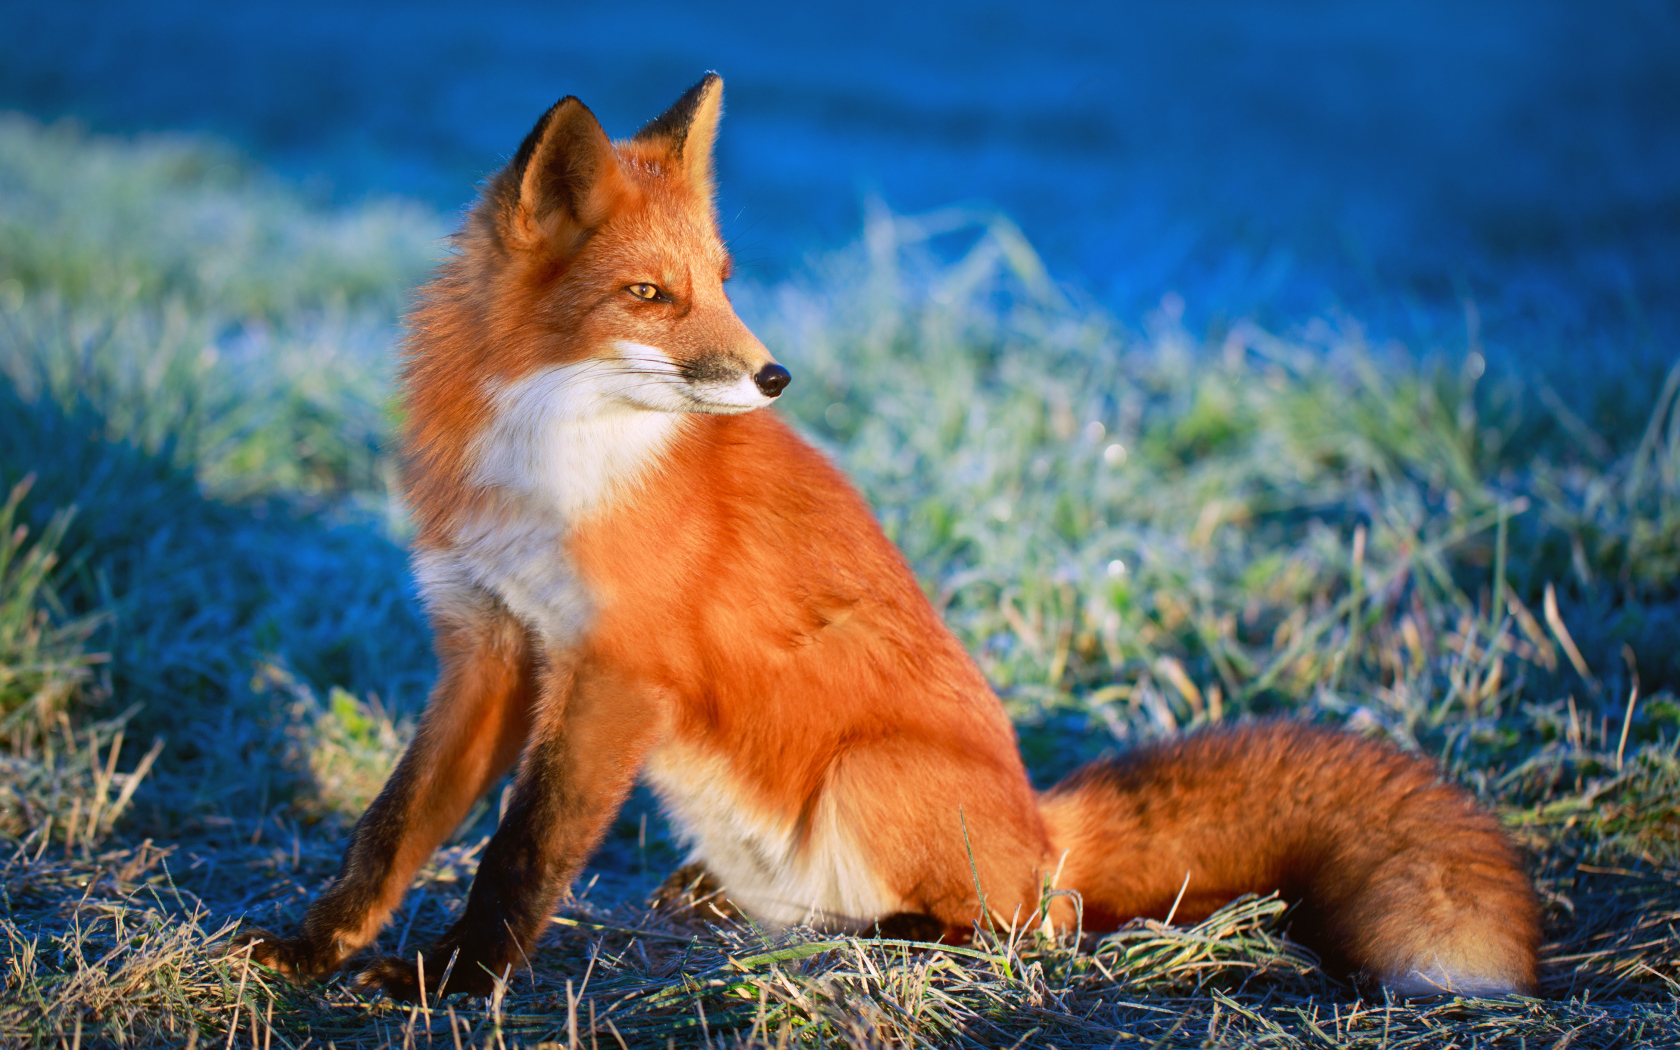 The sly look of the red fox